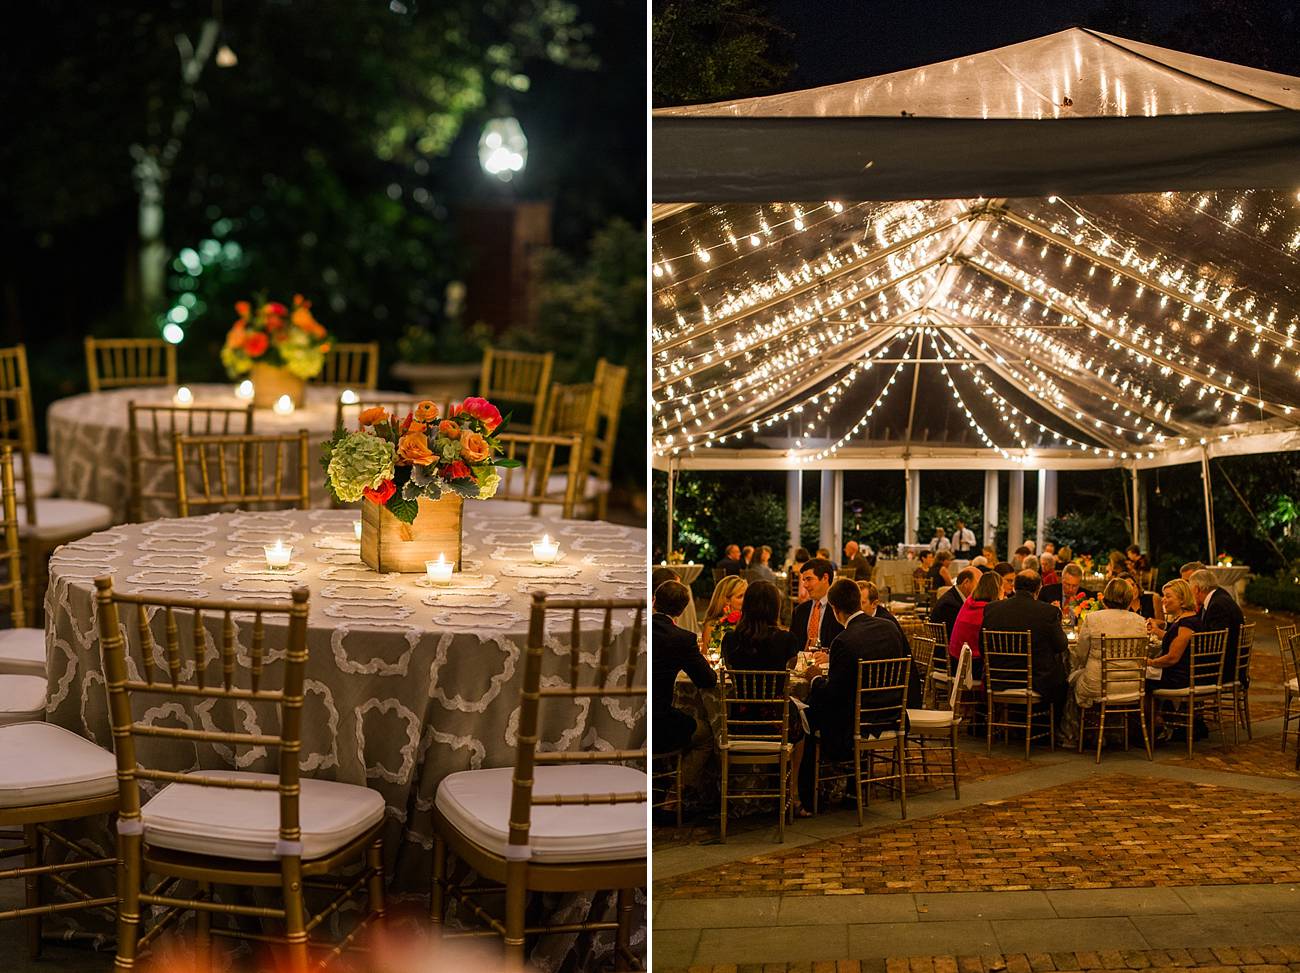 Table settings and the tent at the Duke Mansion in Charlotte, NC